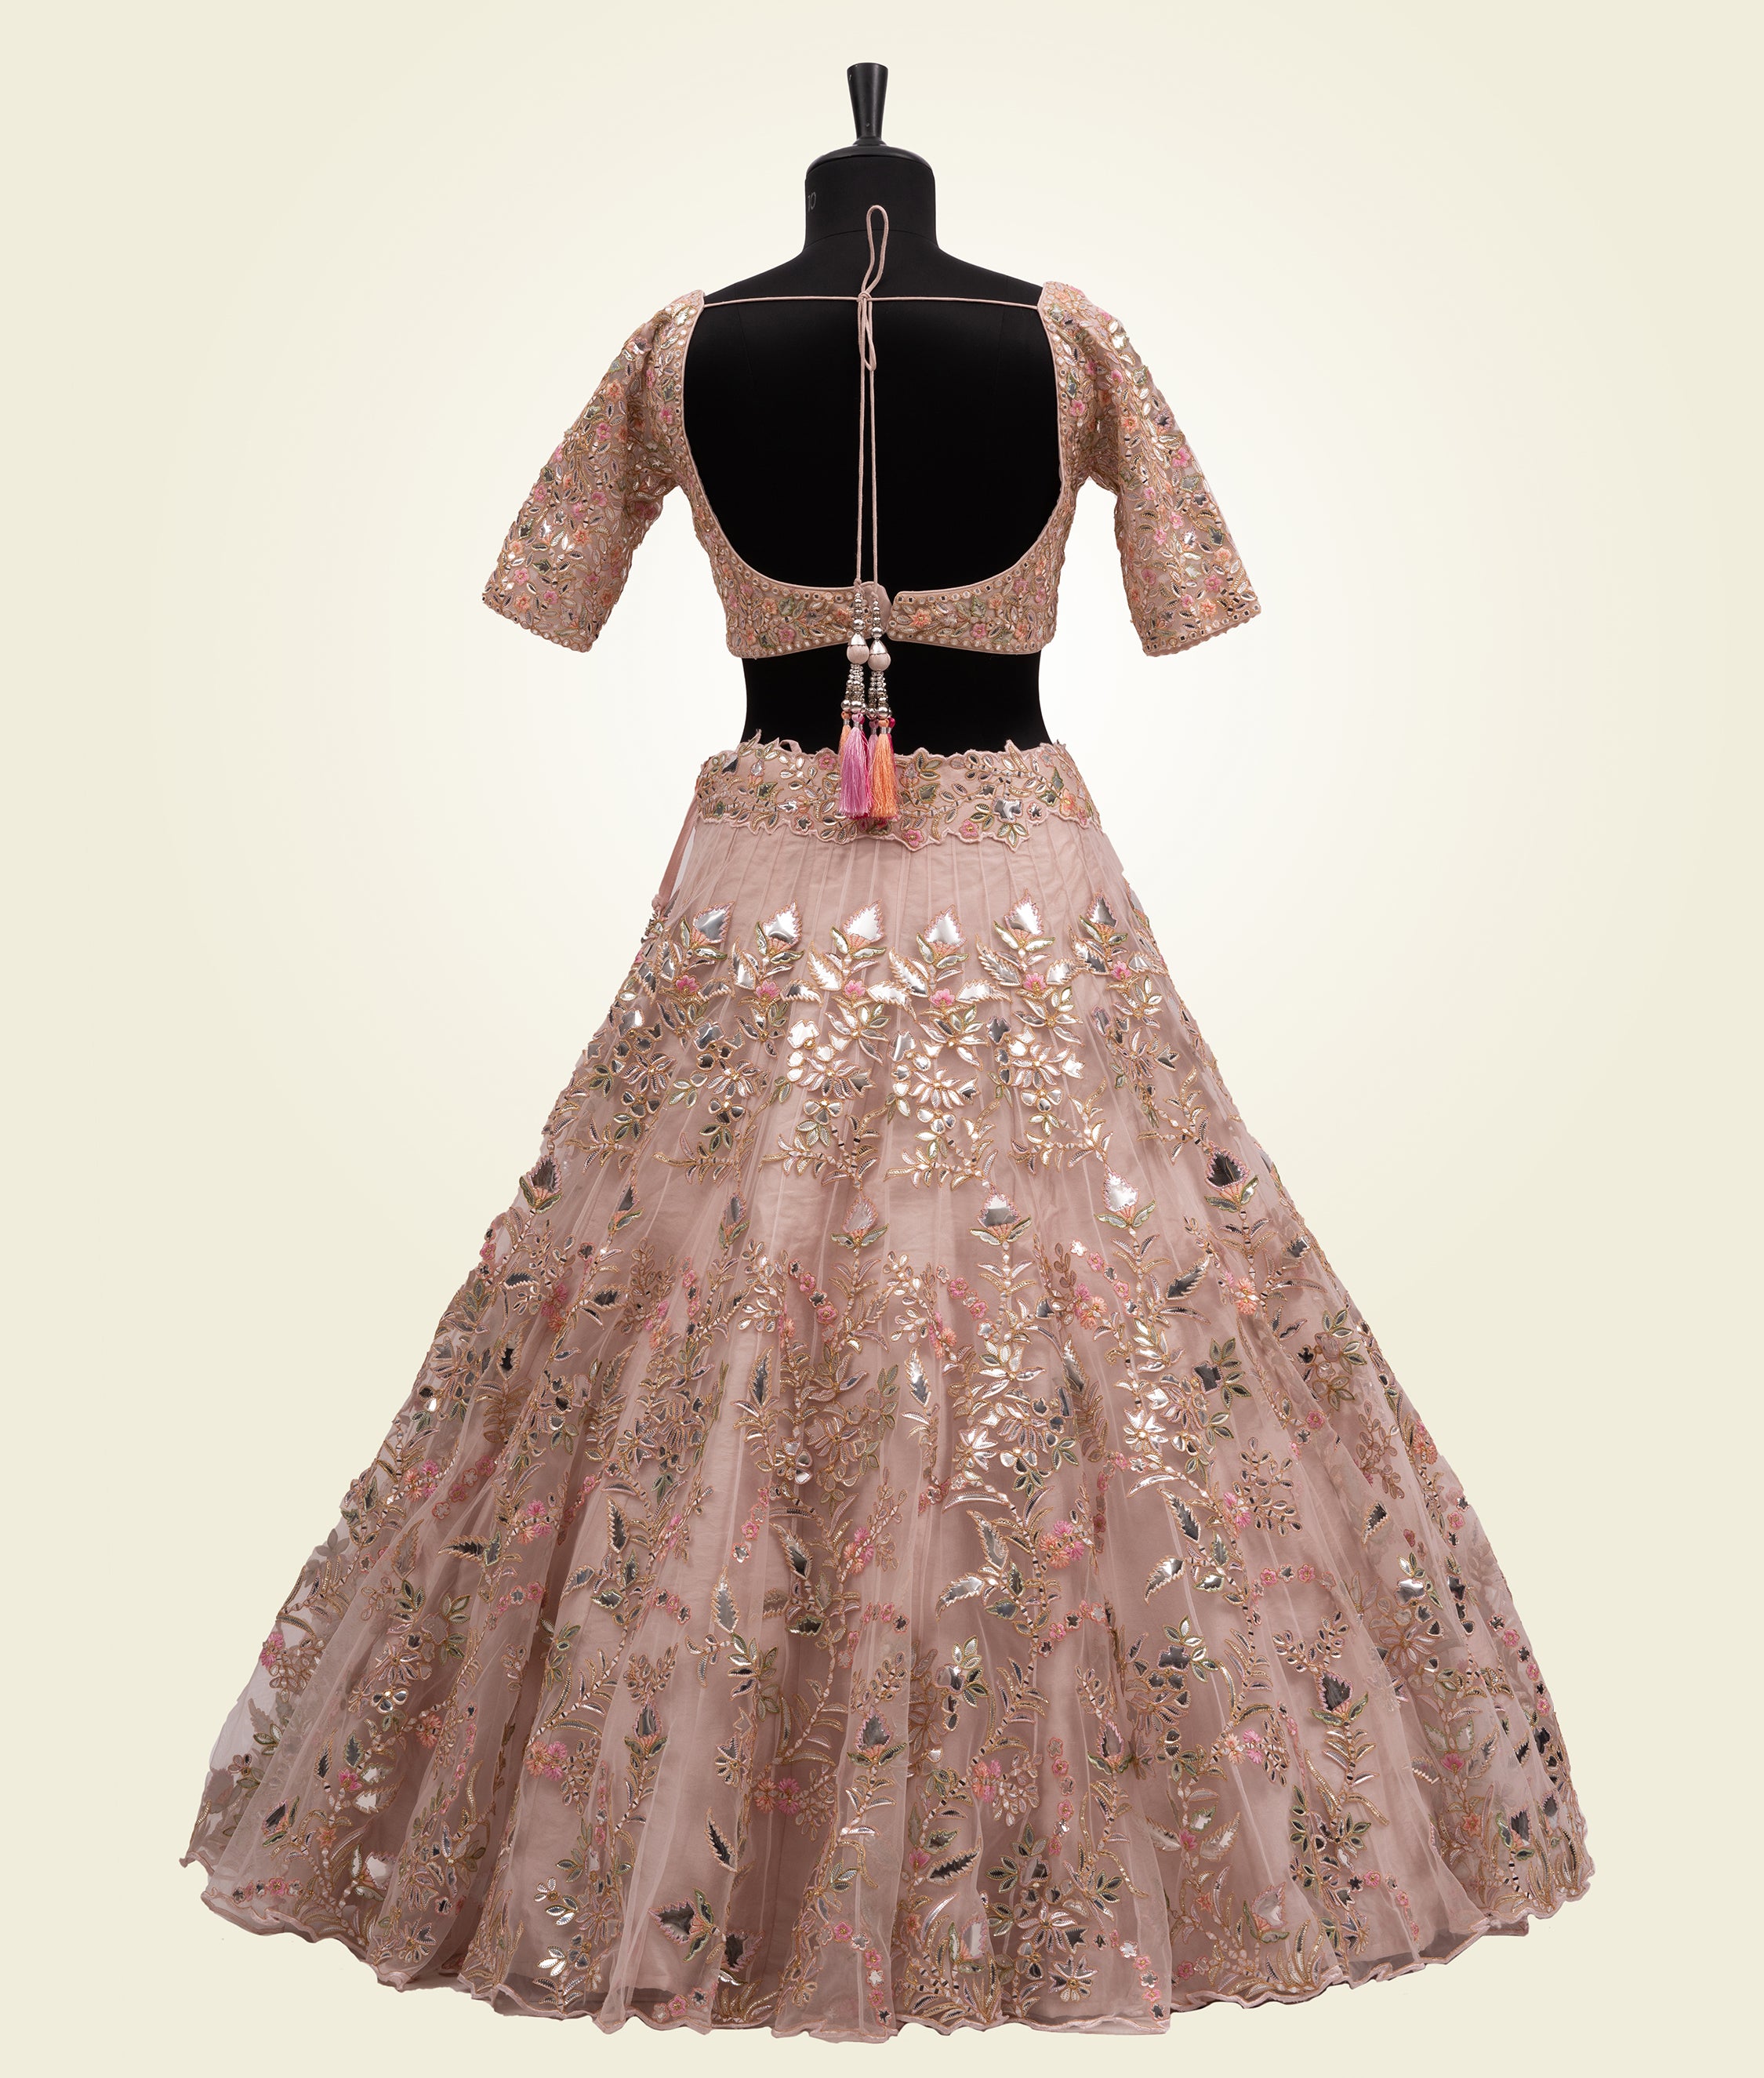 Peach Lehenga Choli with Leather and Applic Work - kaystore.in